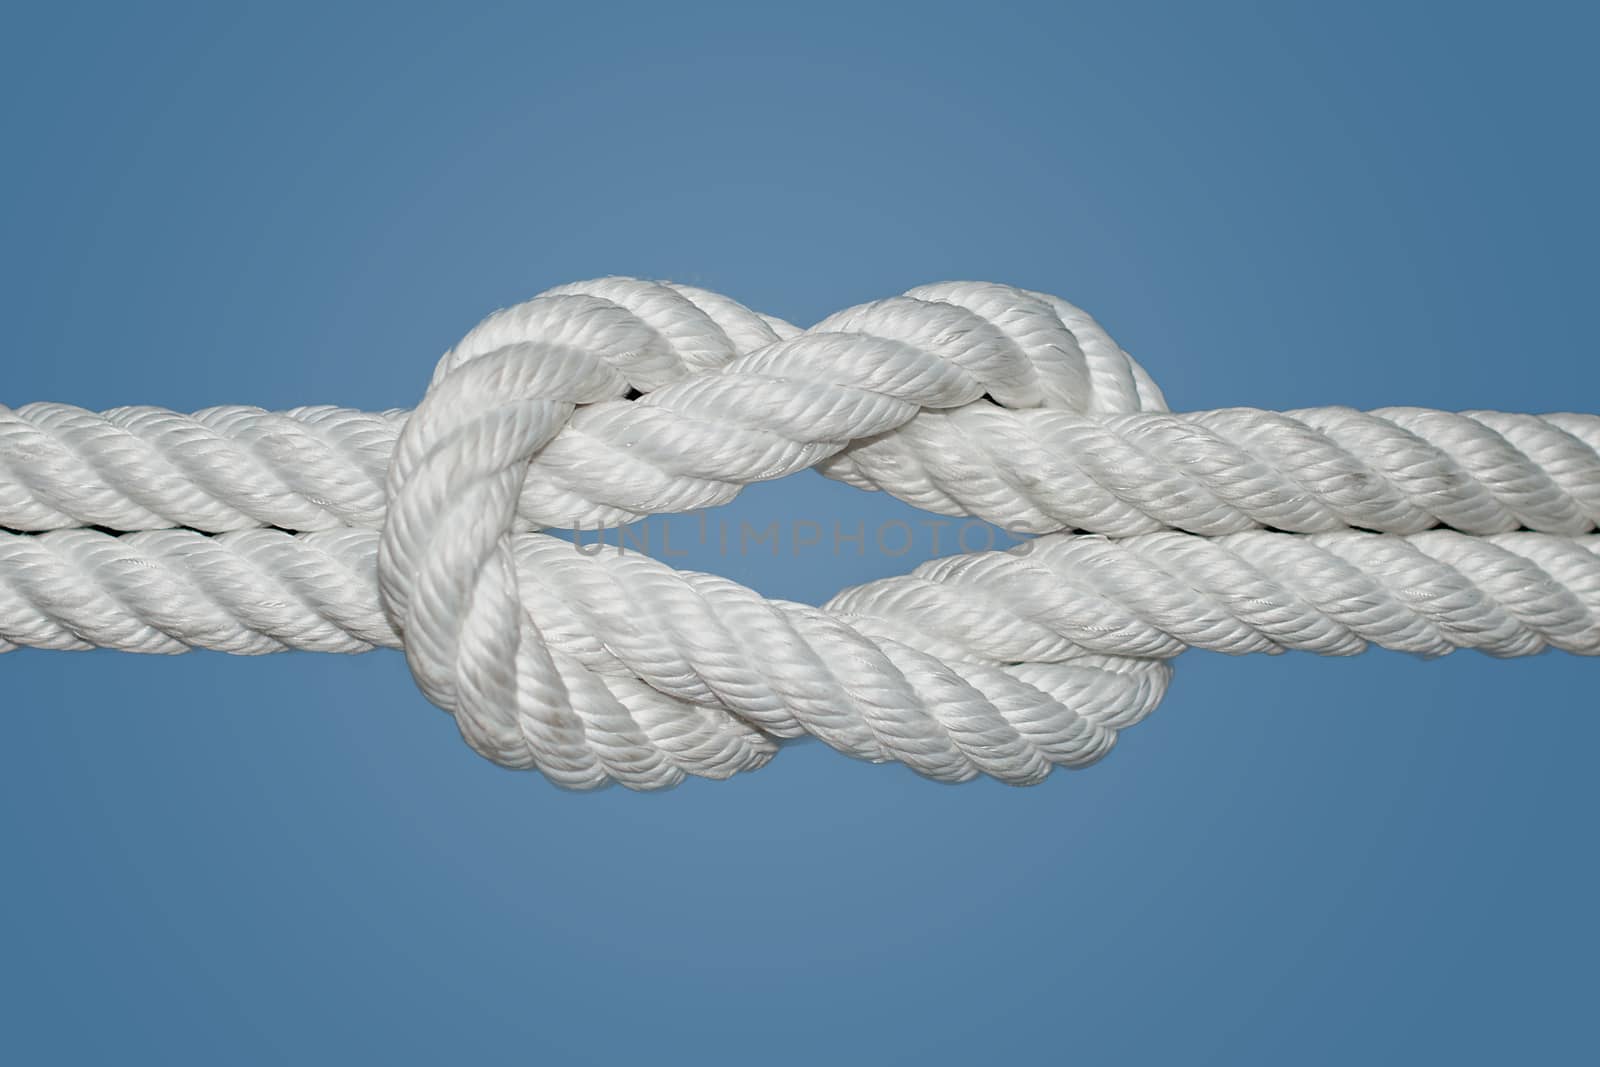 The Reef Knot or Square Knot is quick and easy to tie; it is a good knot for securing non-critical items. This knot was used for centuries by sailors for reefing sails, hence the name Reef Knot.